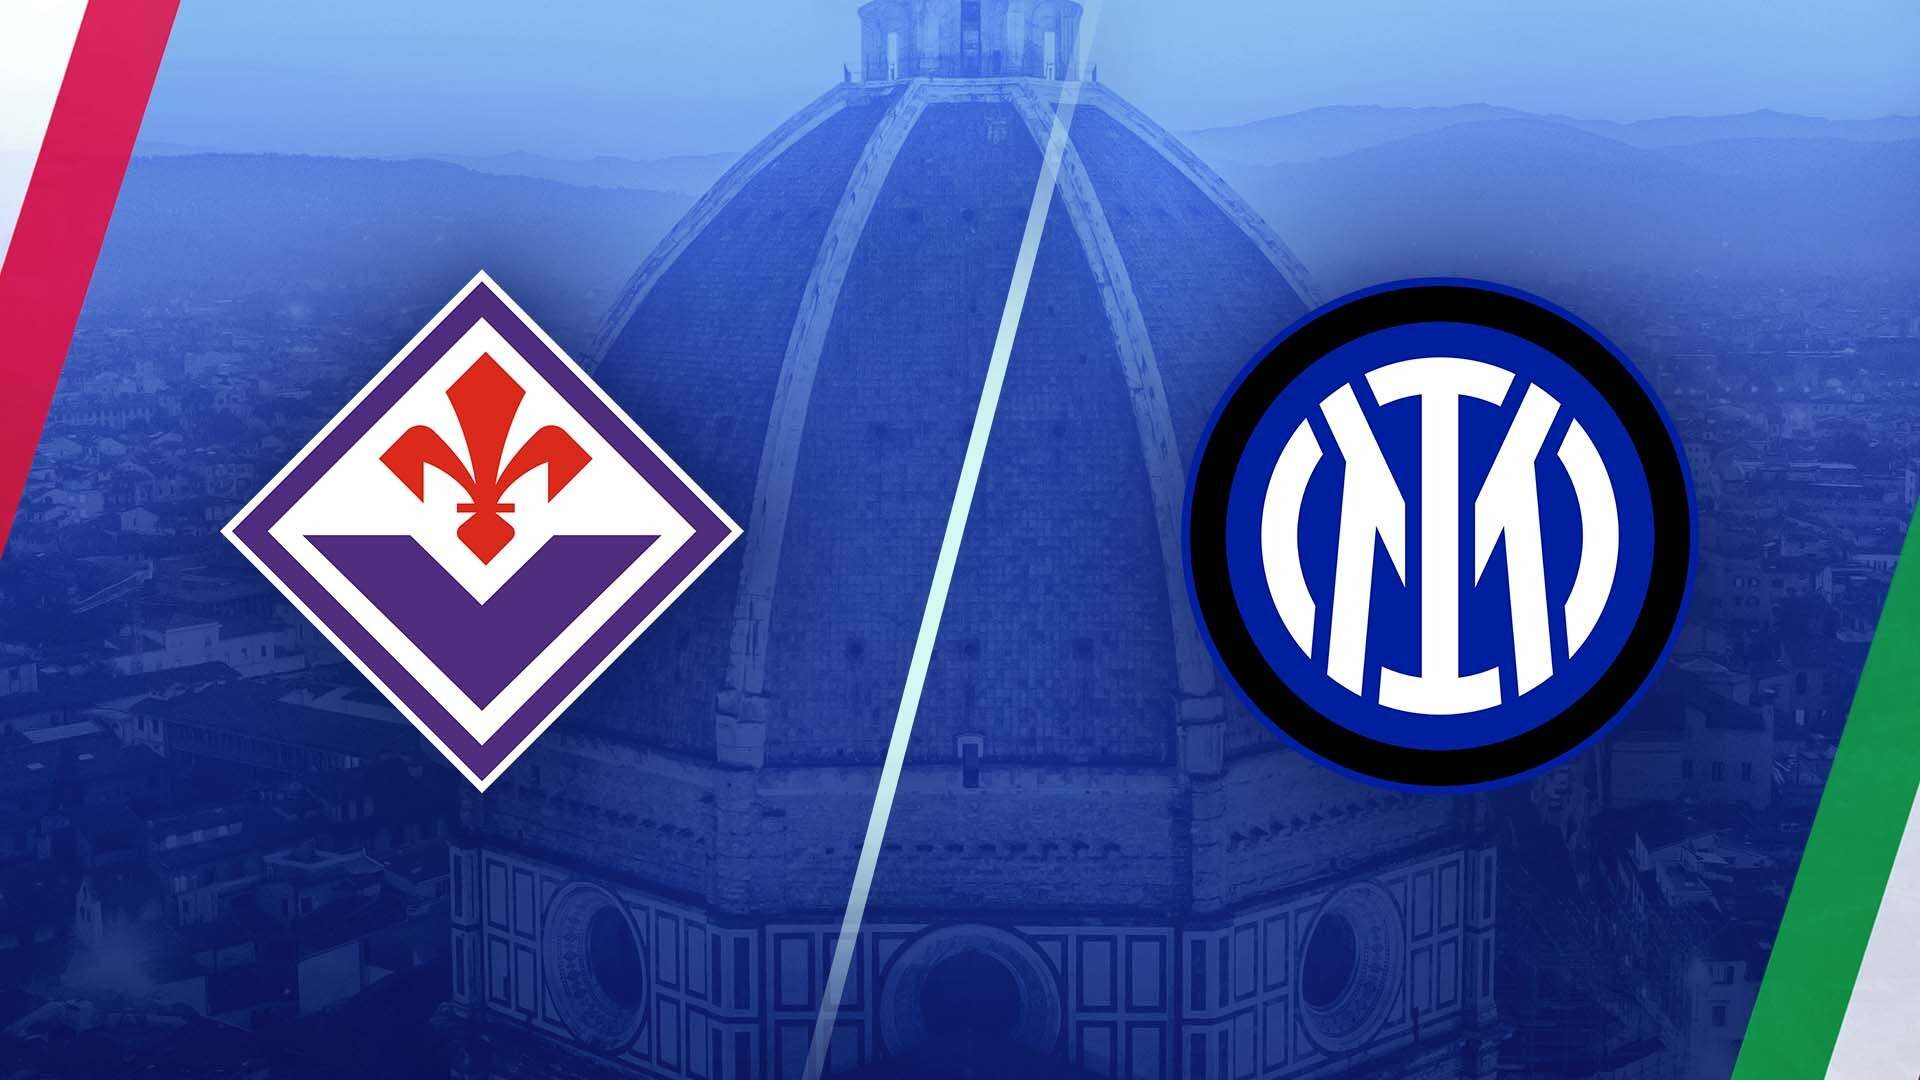 Watch Serie A: Fiorentina vs. Inter - Full show on Paramount Plus